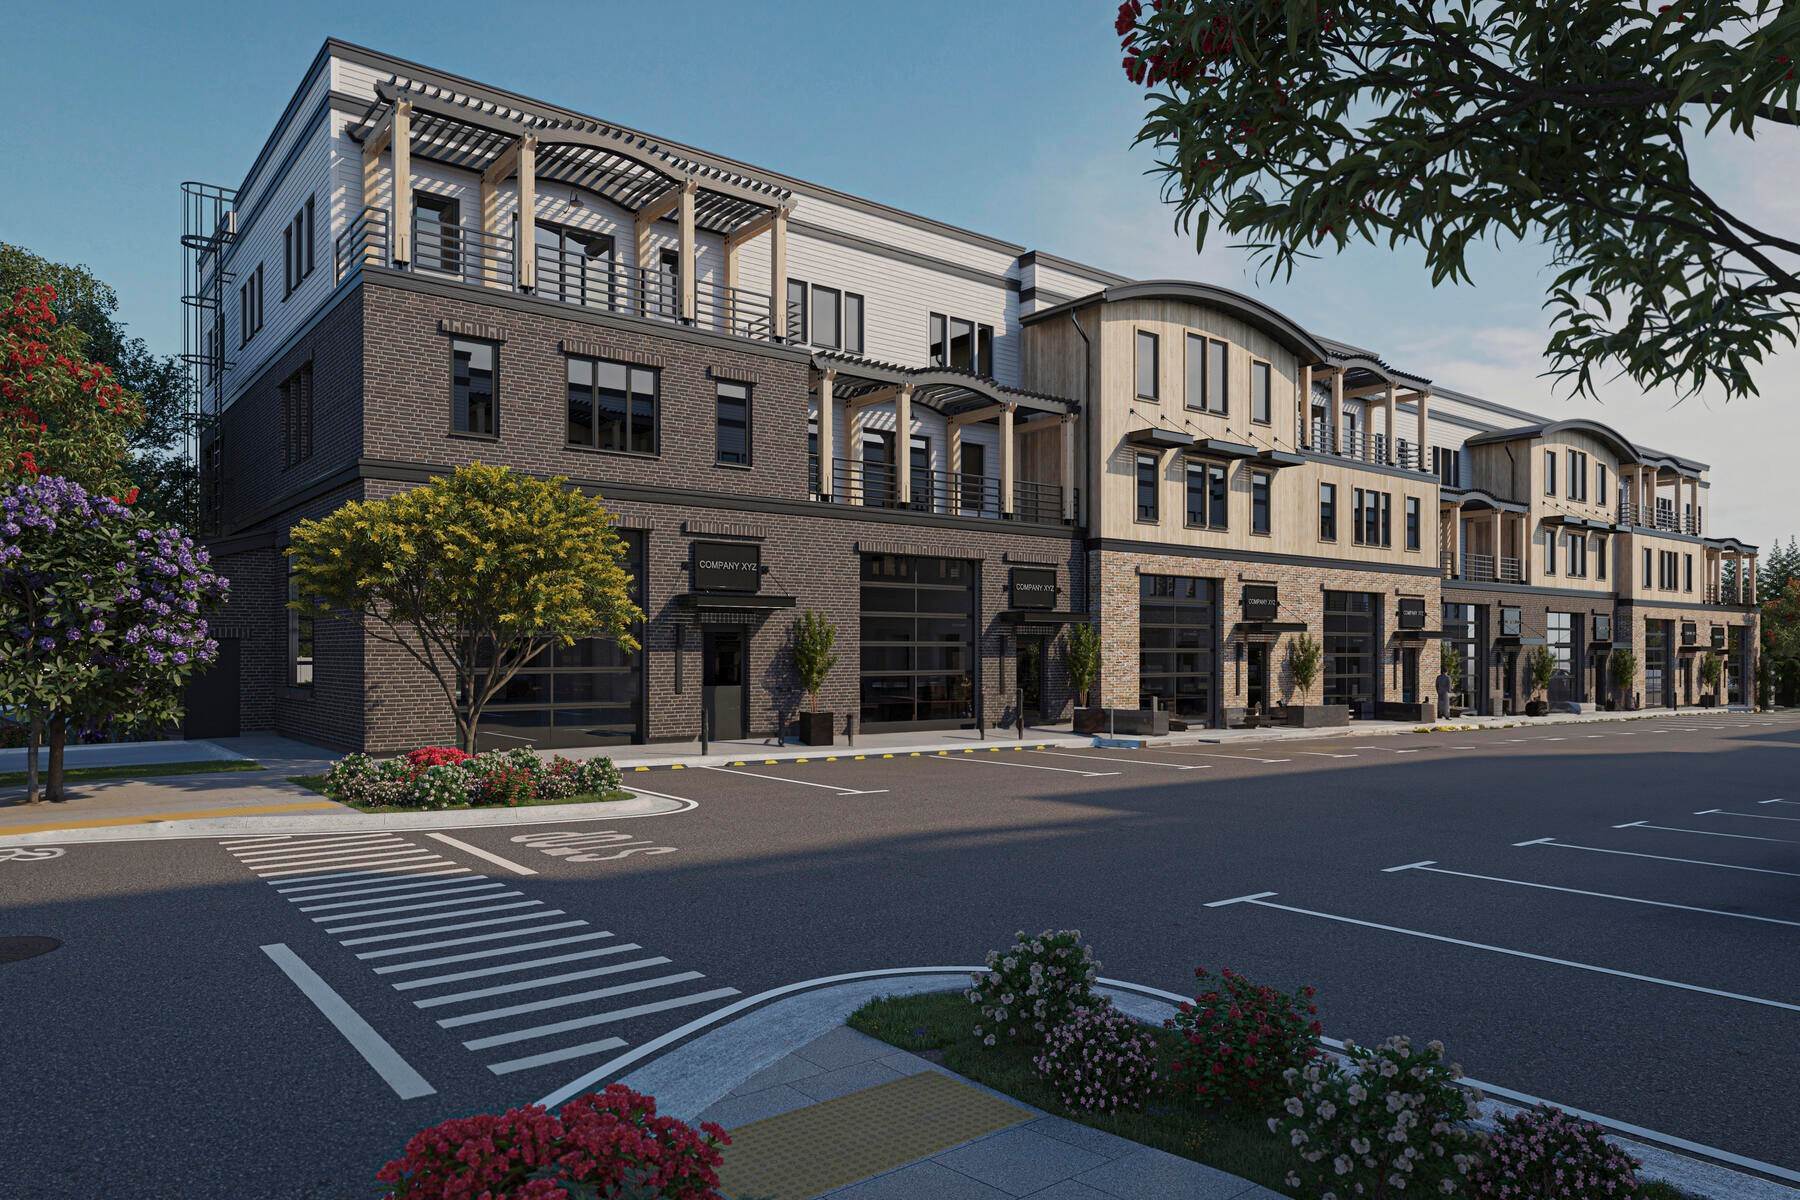 Condominiums for Sale at Mountain View Commons - Heber Valley’s First Mixed Use Opportunity 1922 S Highway 40 Unit 42 Heber City, Utah 84032 United States